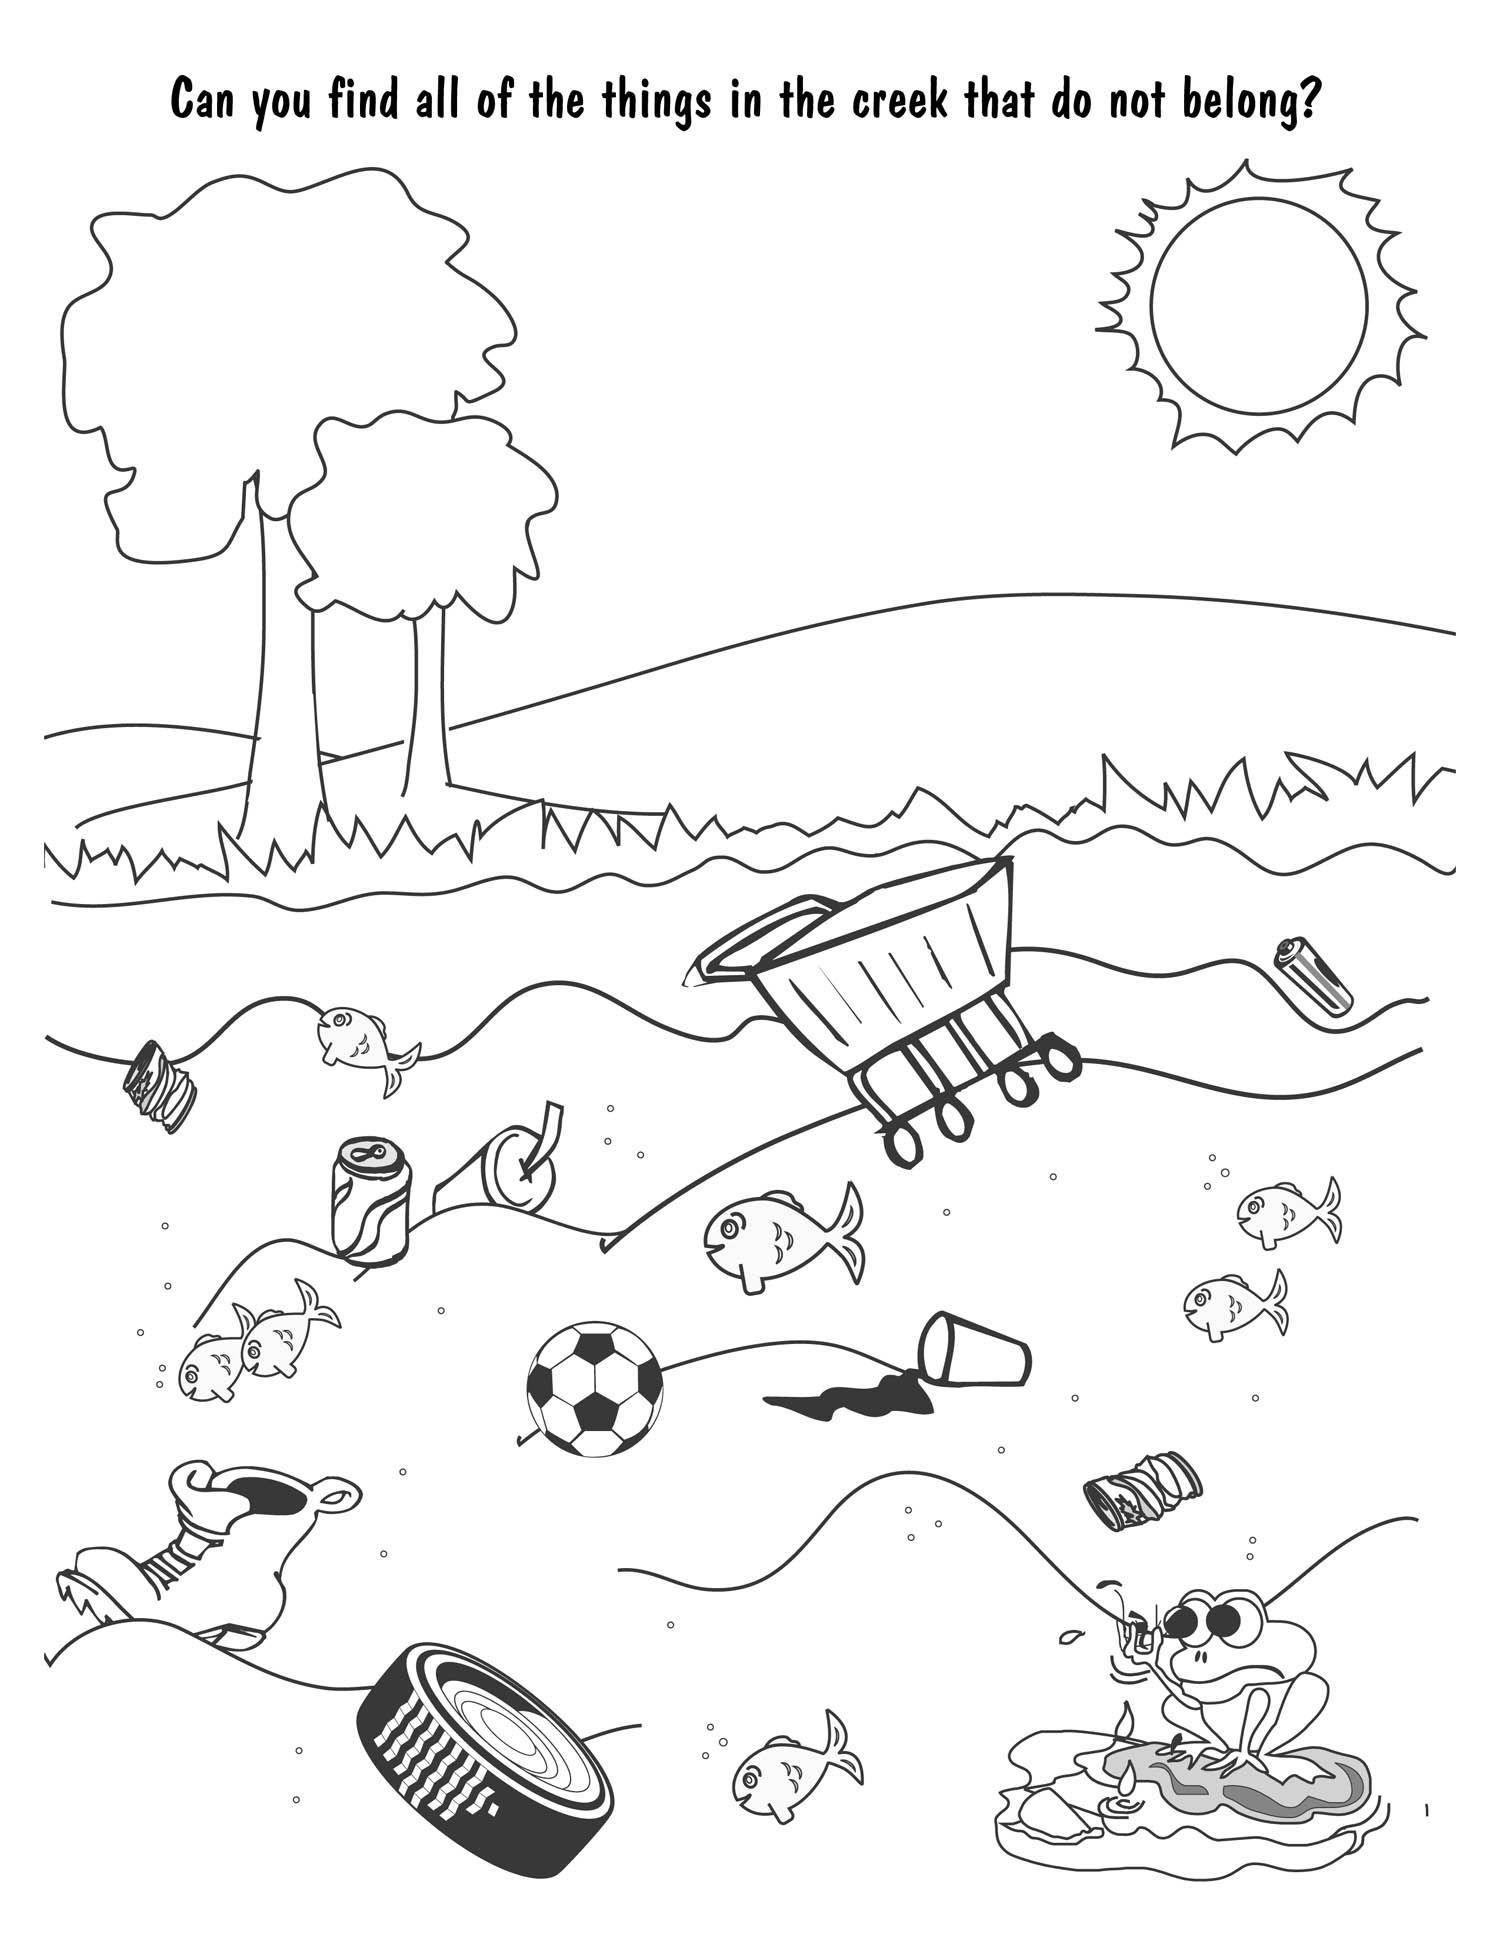 Water Pollution Coloring Pages at GetDrawings Free download